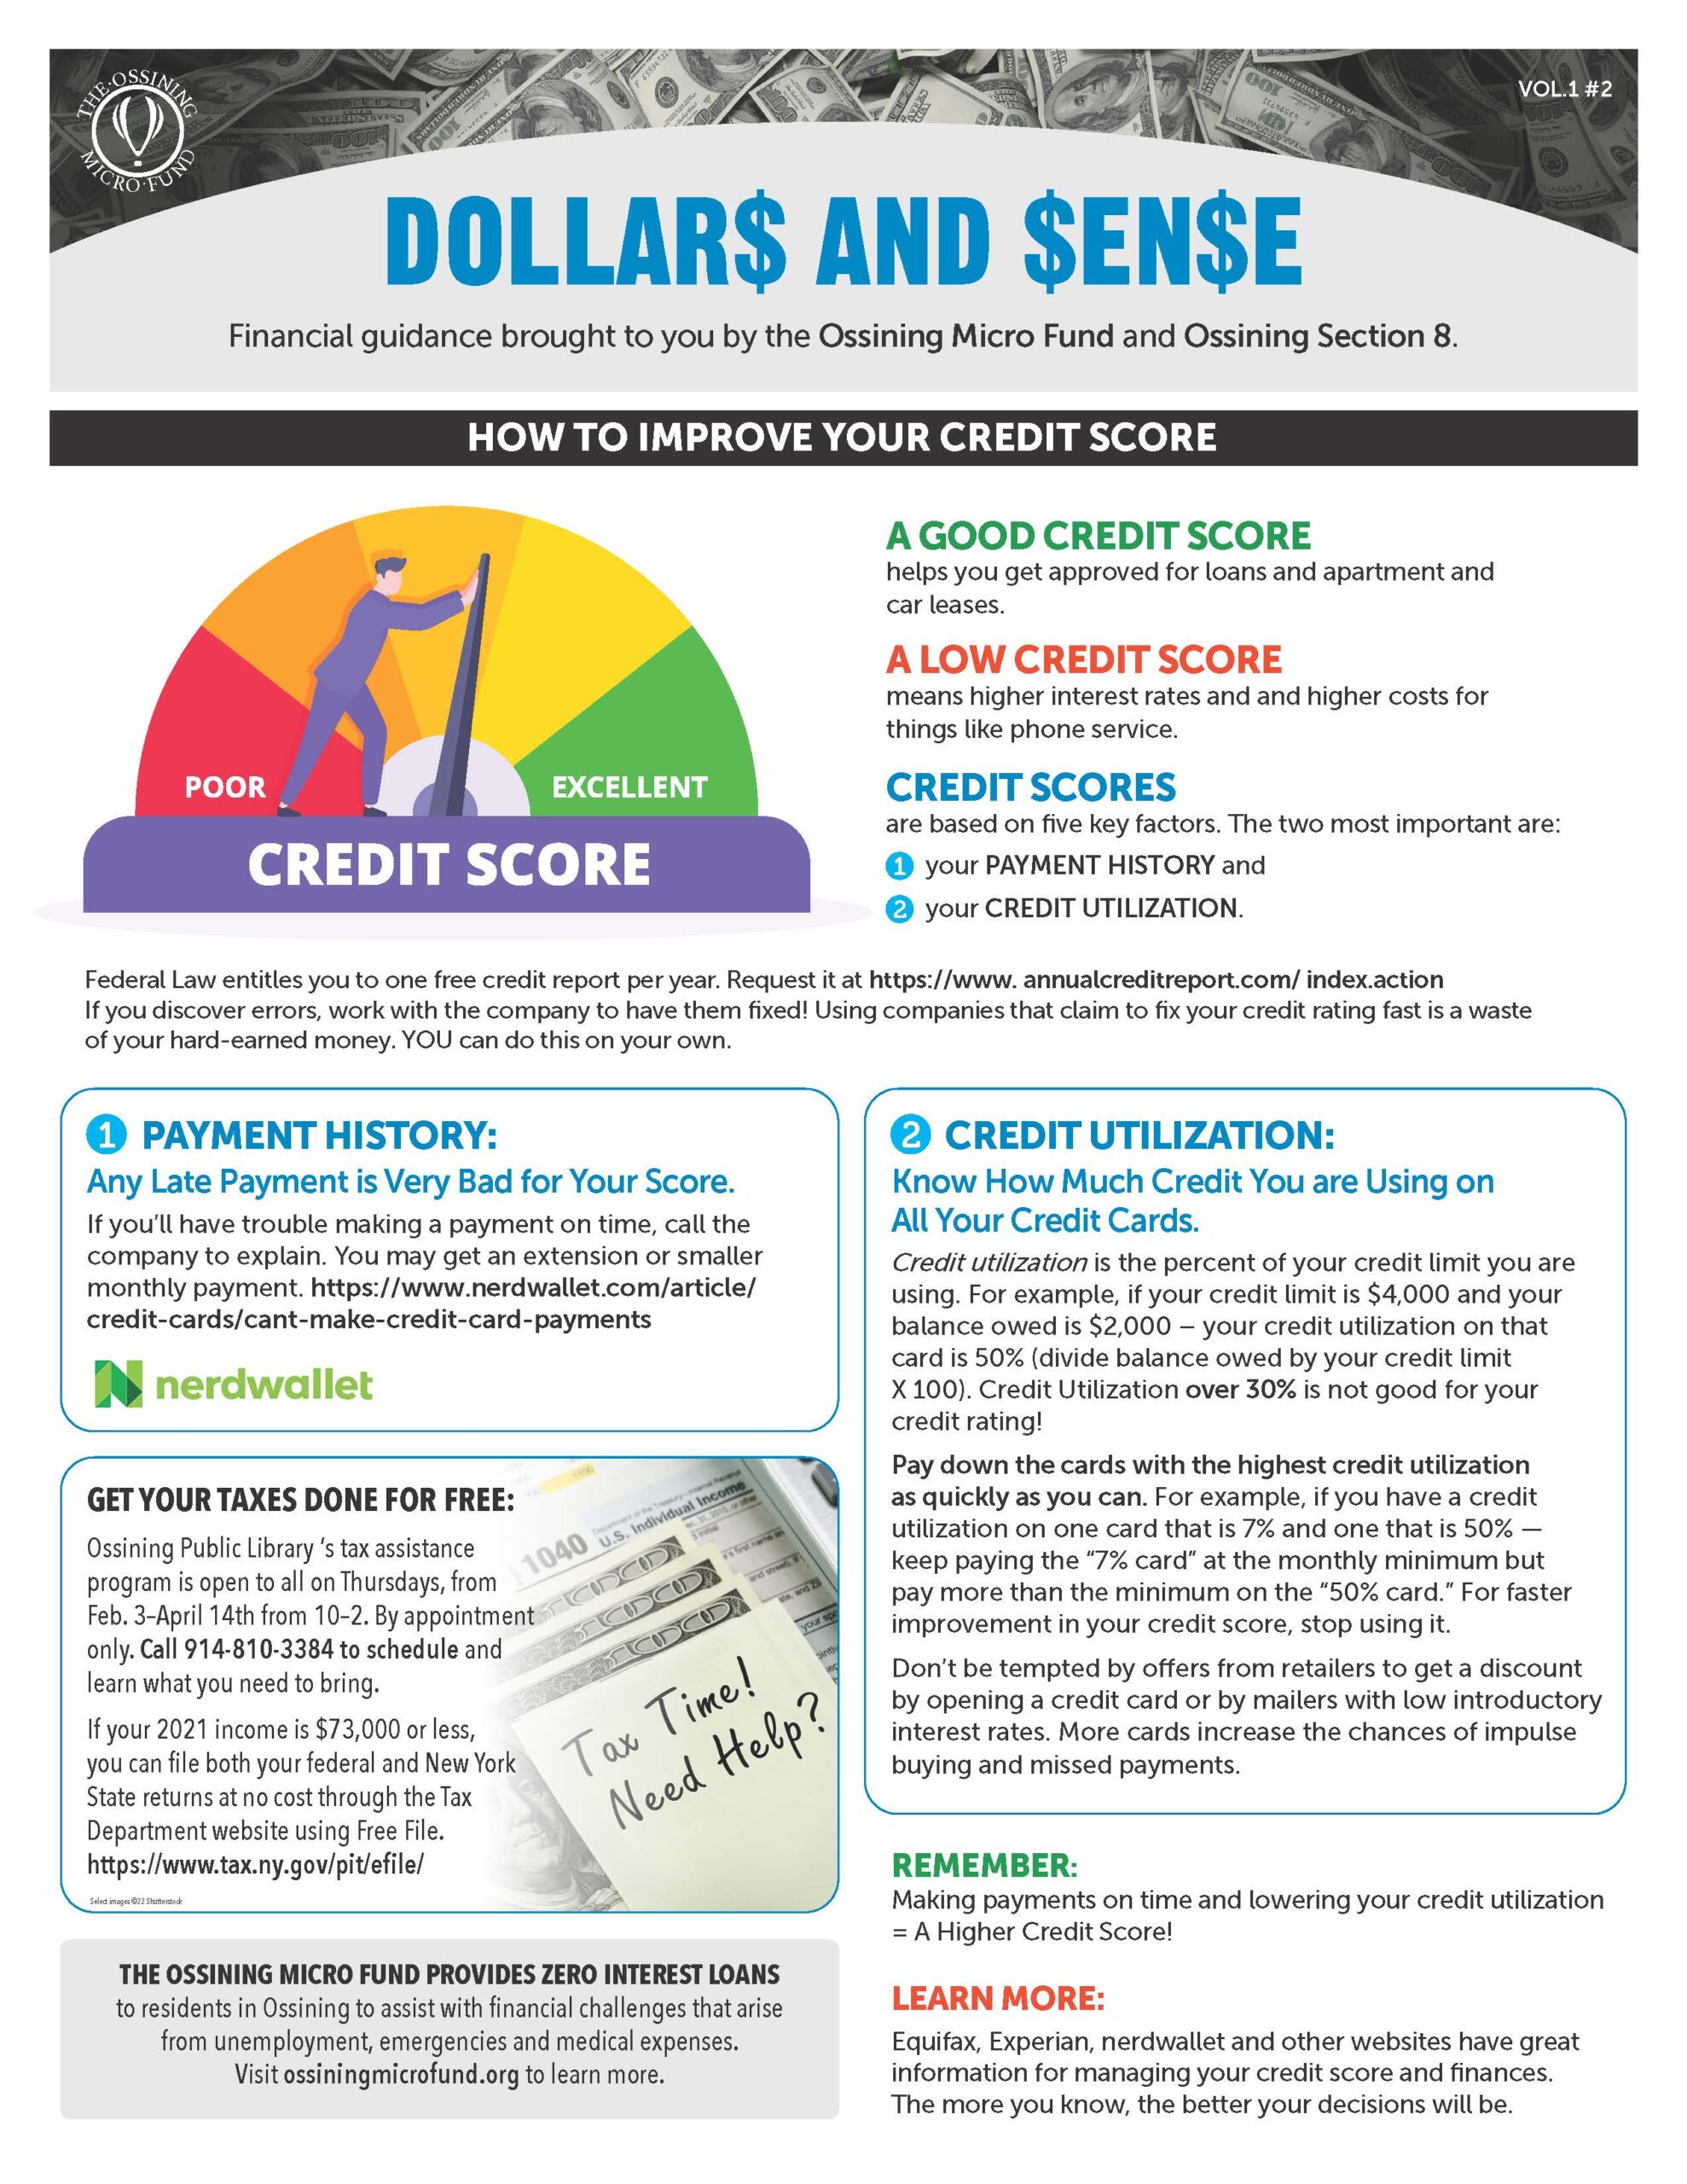 OMF Bulletin Vol1 Issue2 on Credit Scores (1)_Page_1